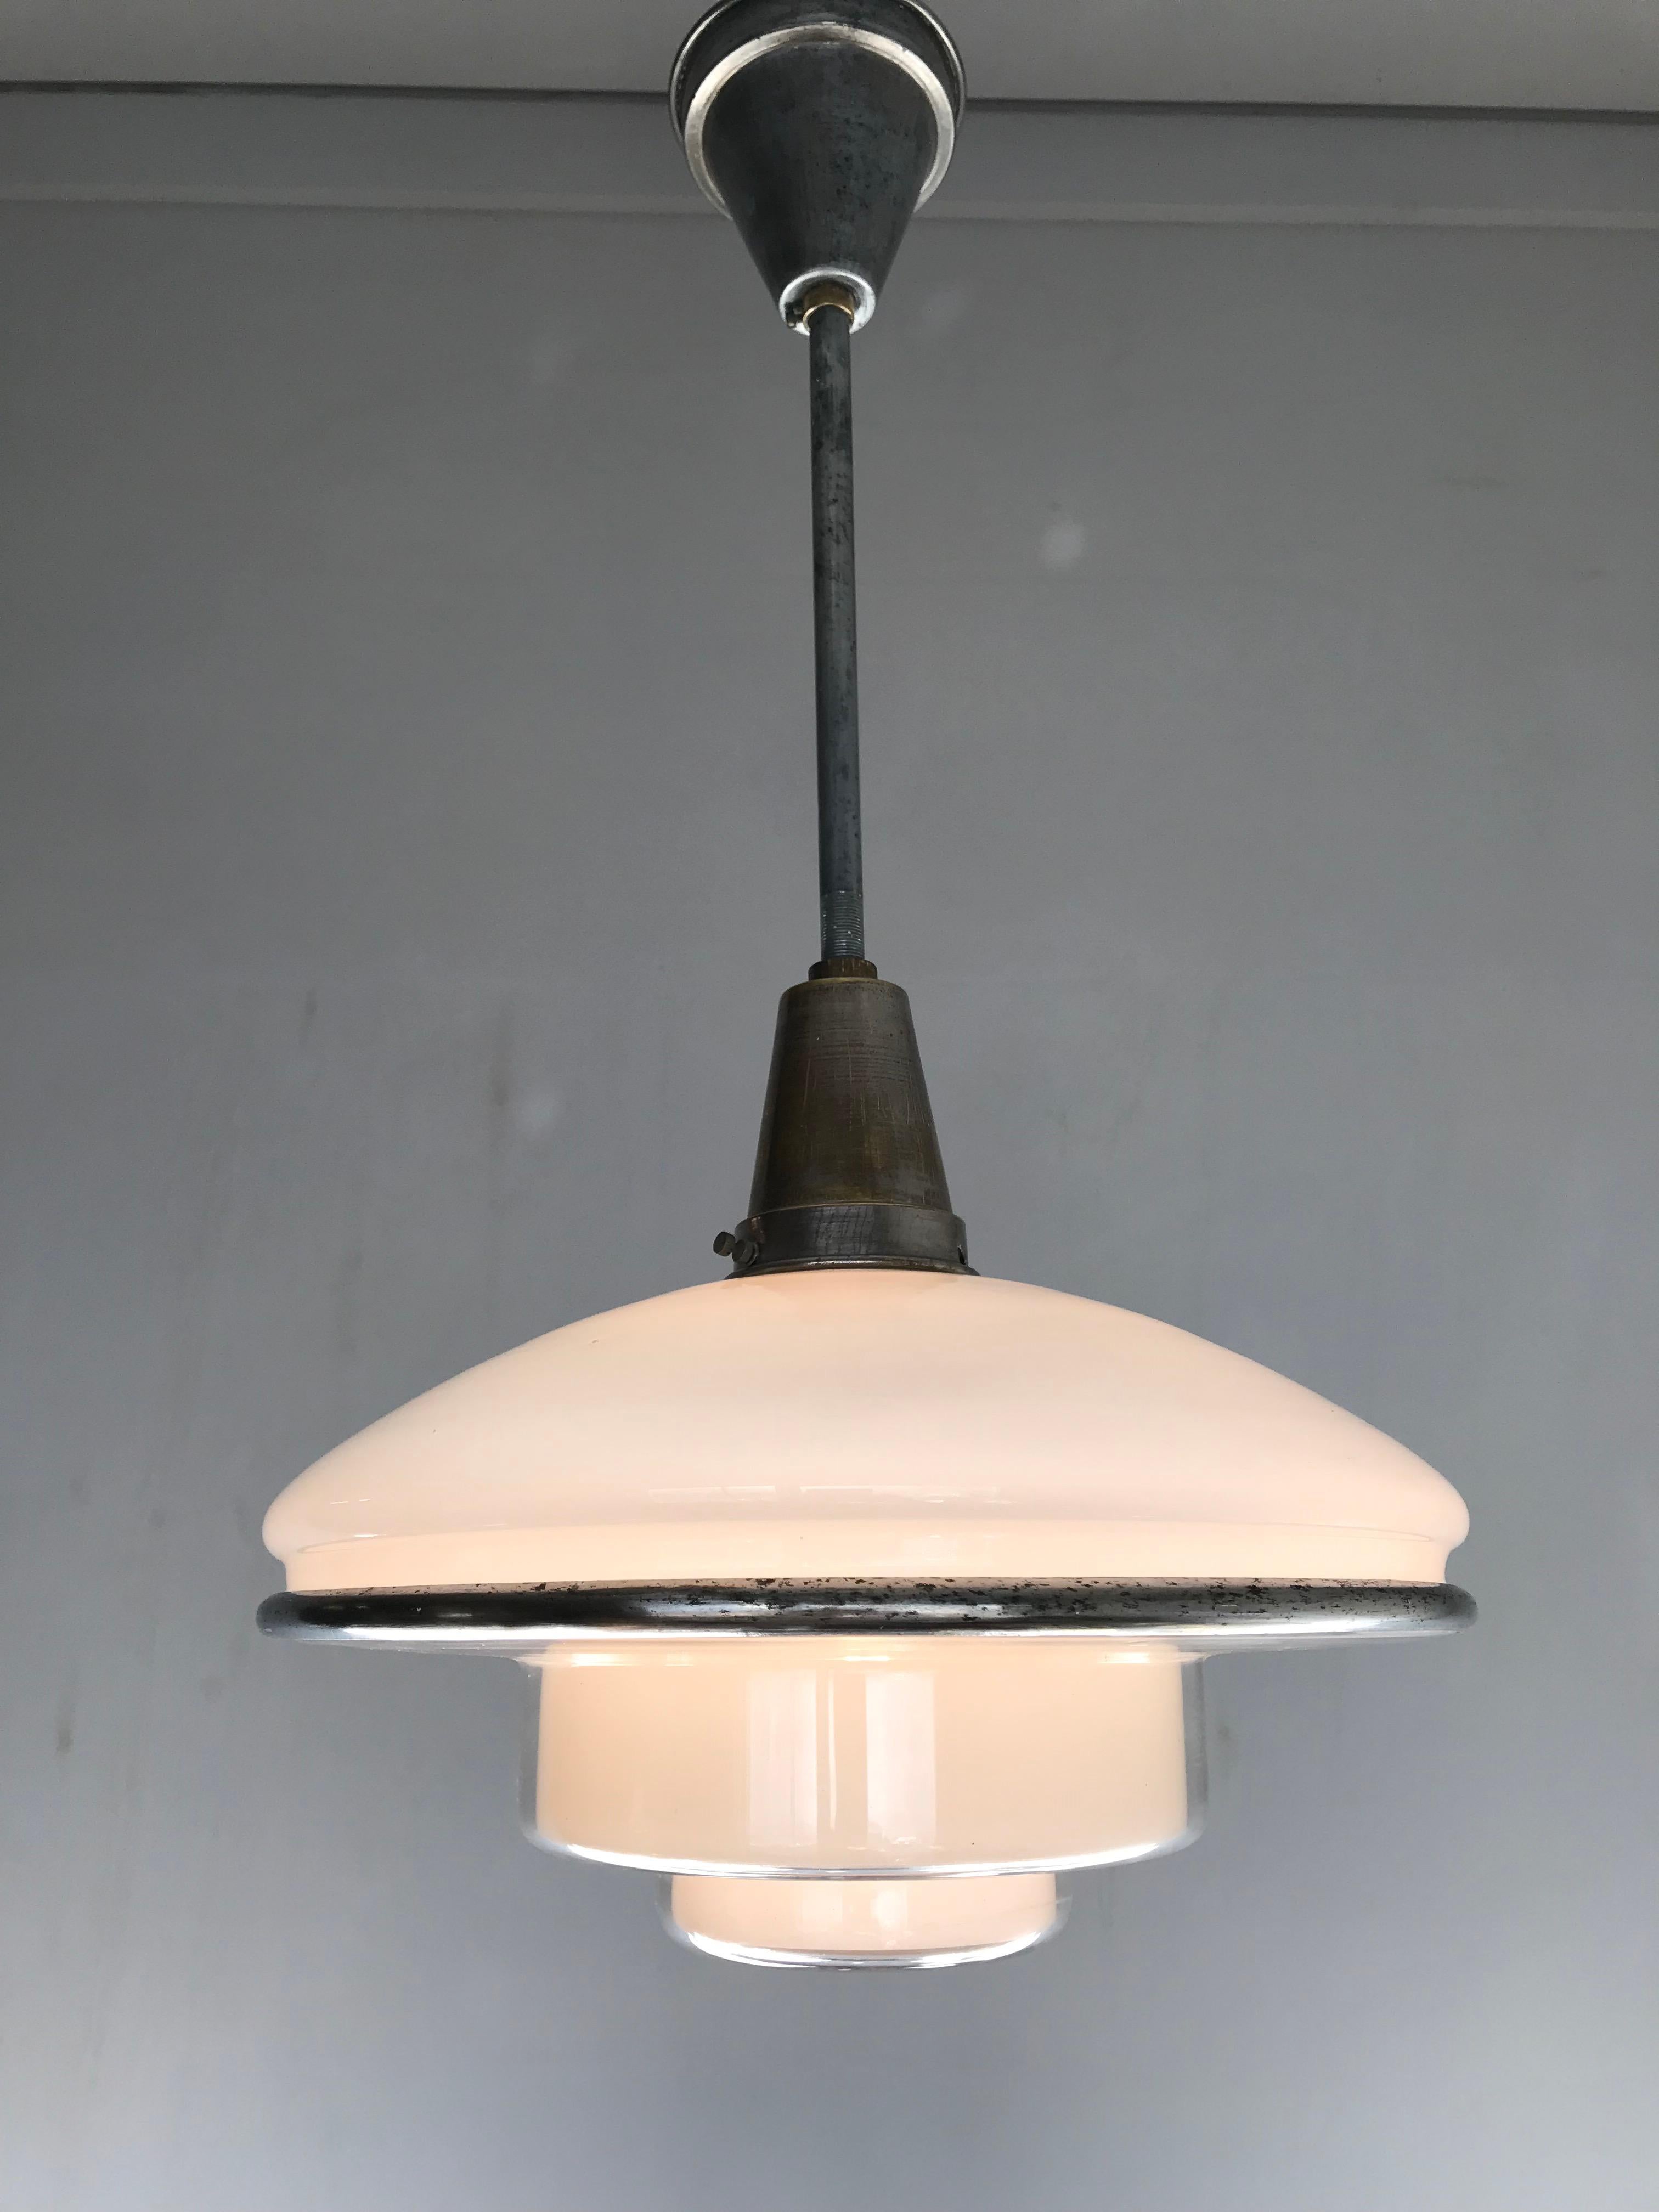 1920s Bauhaus style light fixture with original rod and canopy.

This stunning Otto Müller for Sistrah pendant is in very good to excellent condition and thanks to its shape this timeless piece of lighting art can be used in various kinds of